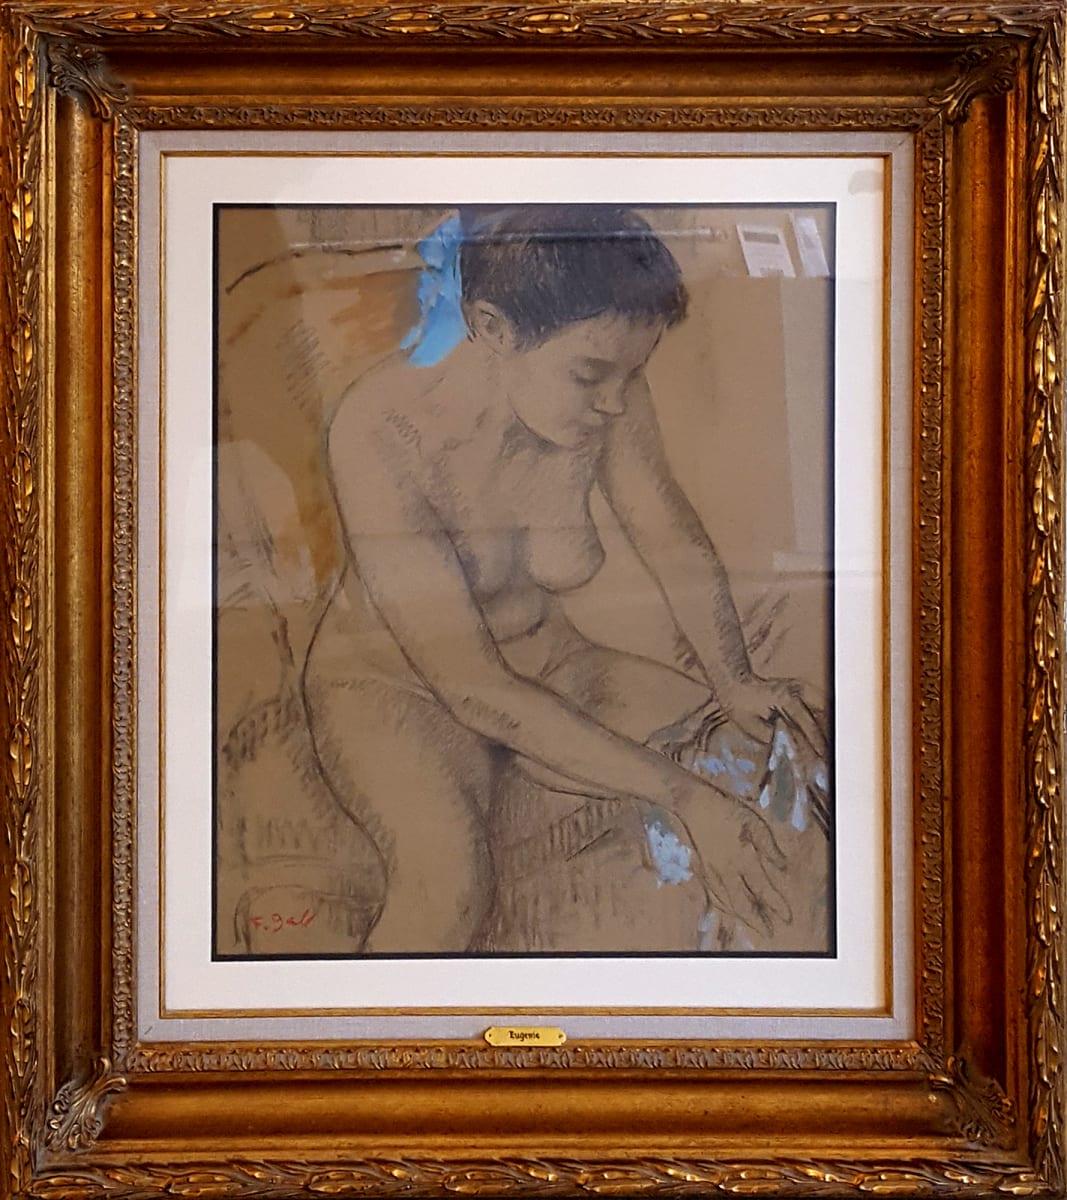 2445 - Apres Le Bain/ After The Bath (Eugenie) by Francois Gall (1912-1987) 